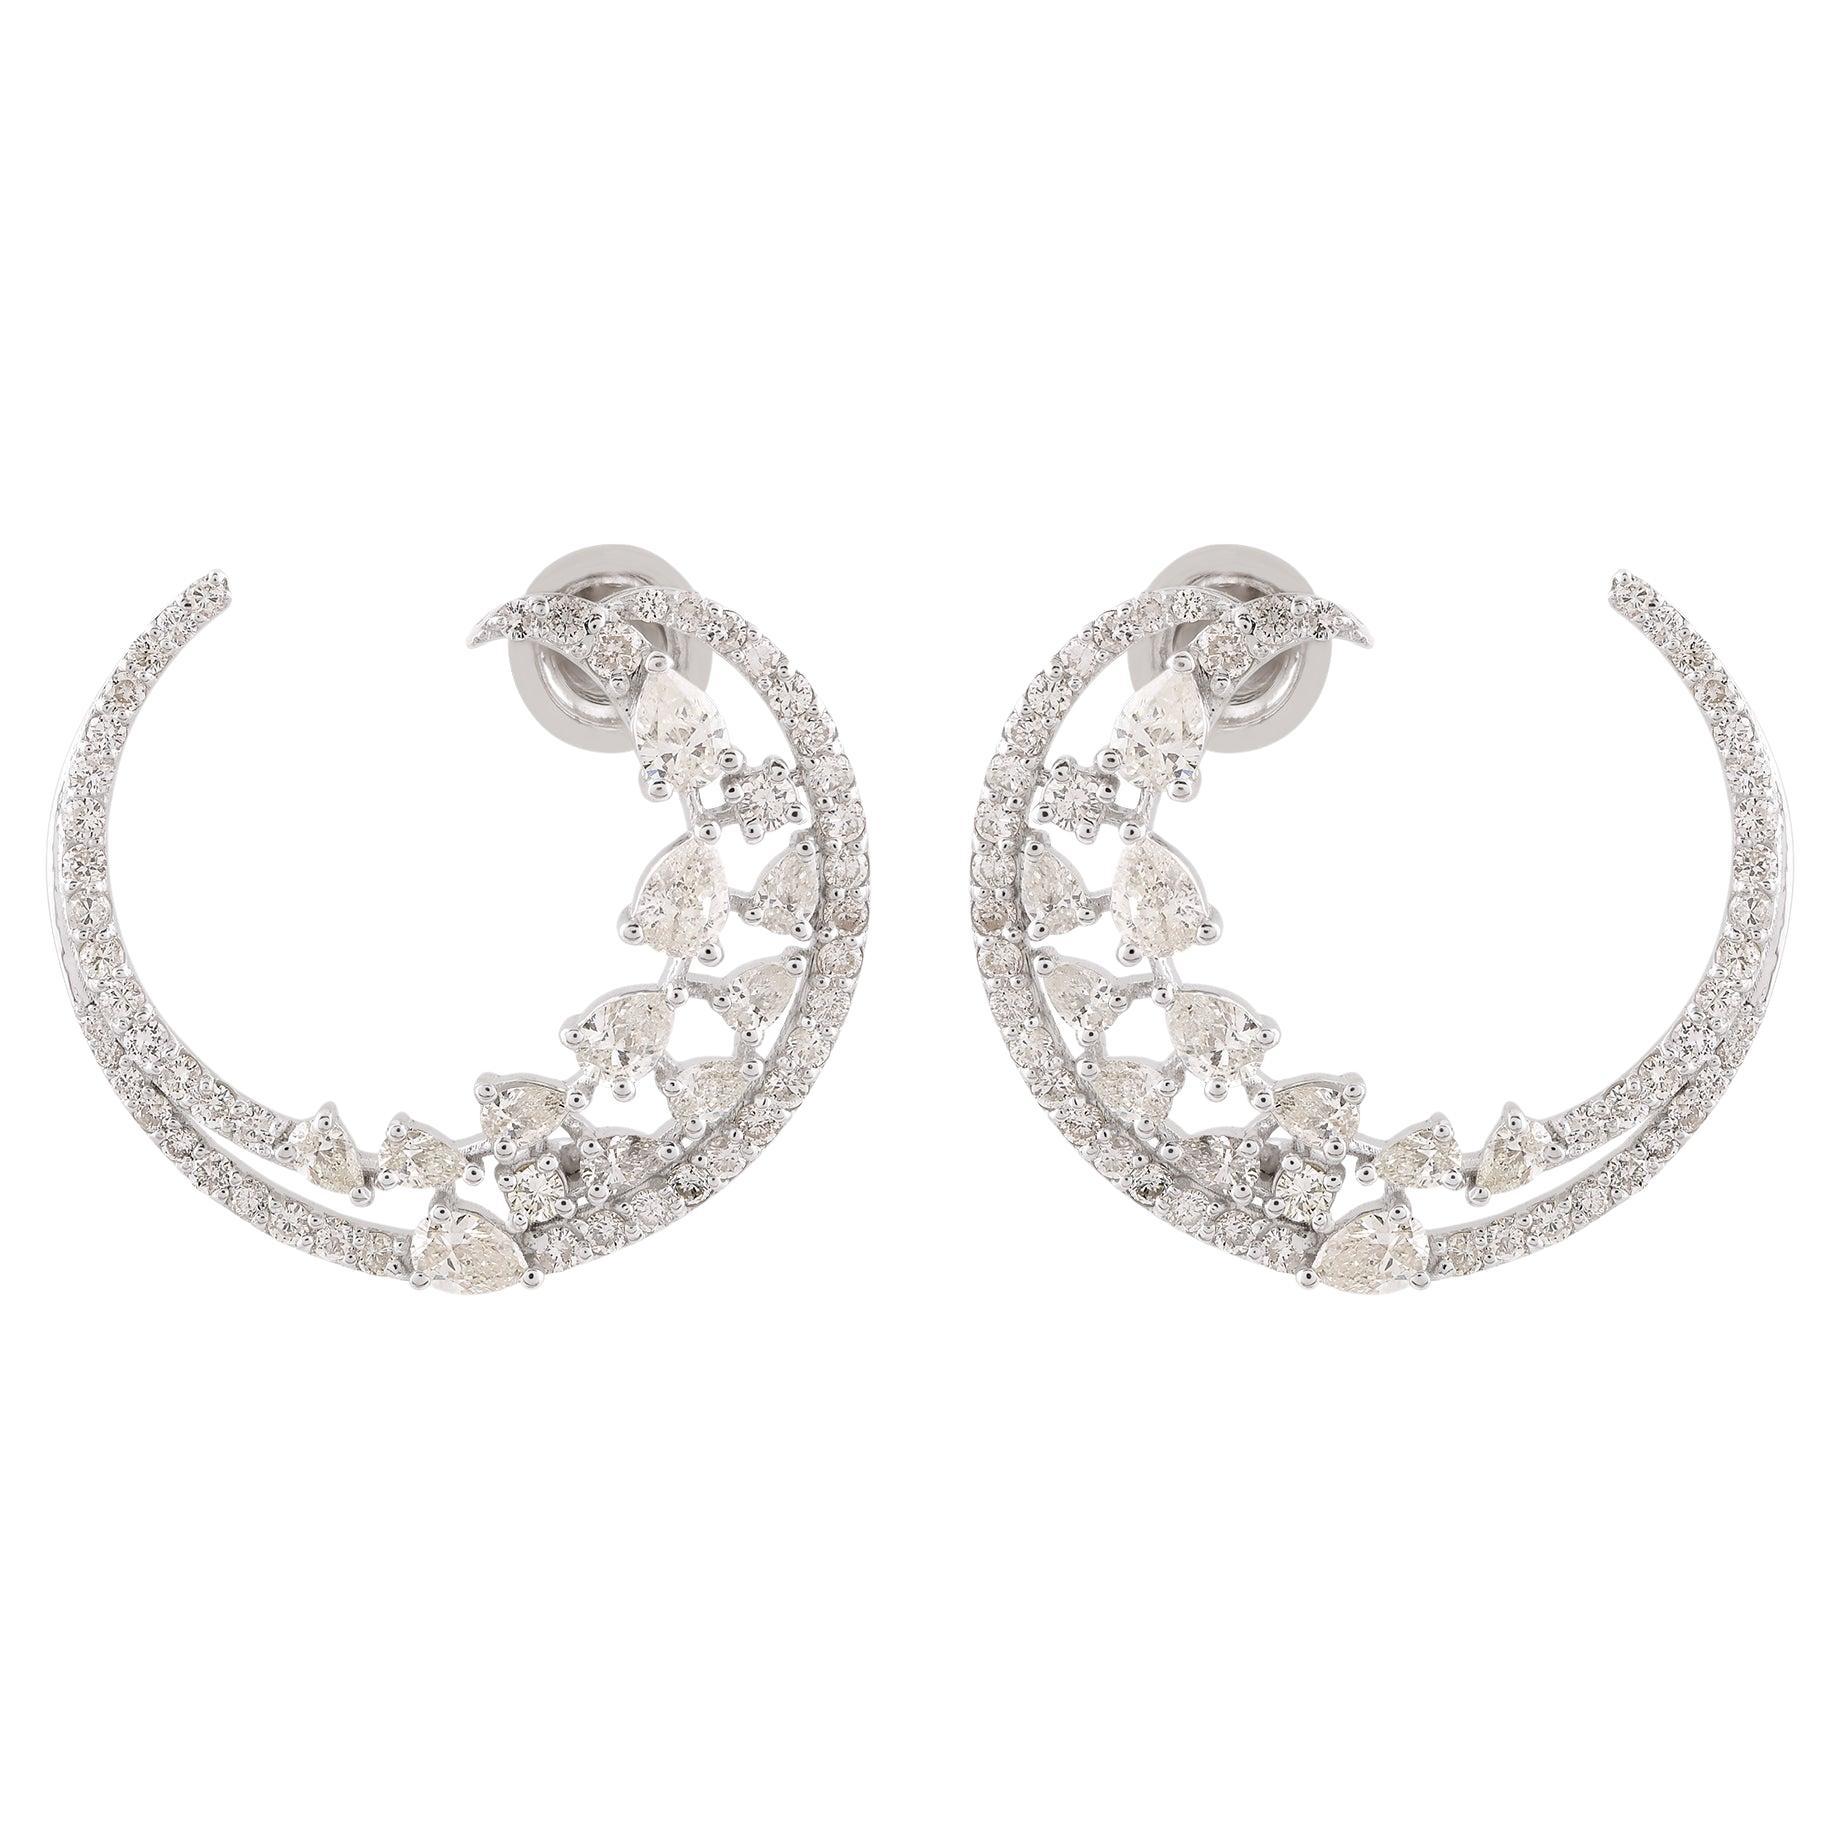 Natural SI Clarity HI Color Diamond Crescent Moon Hoop Earrings 14k White Gold